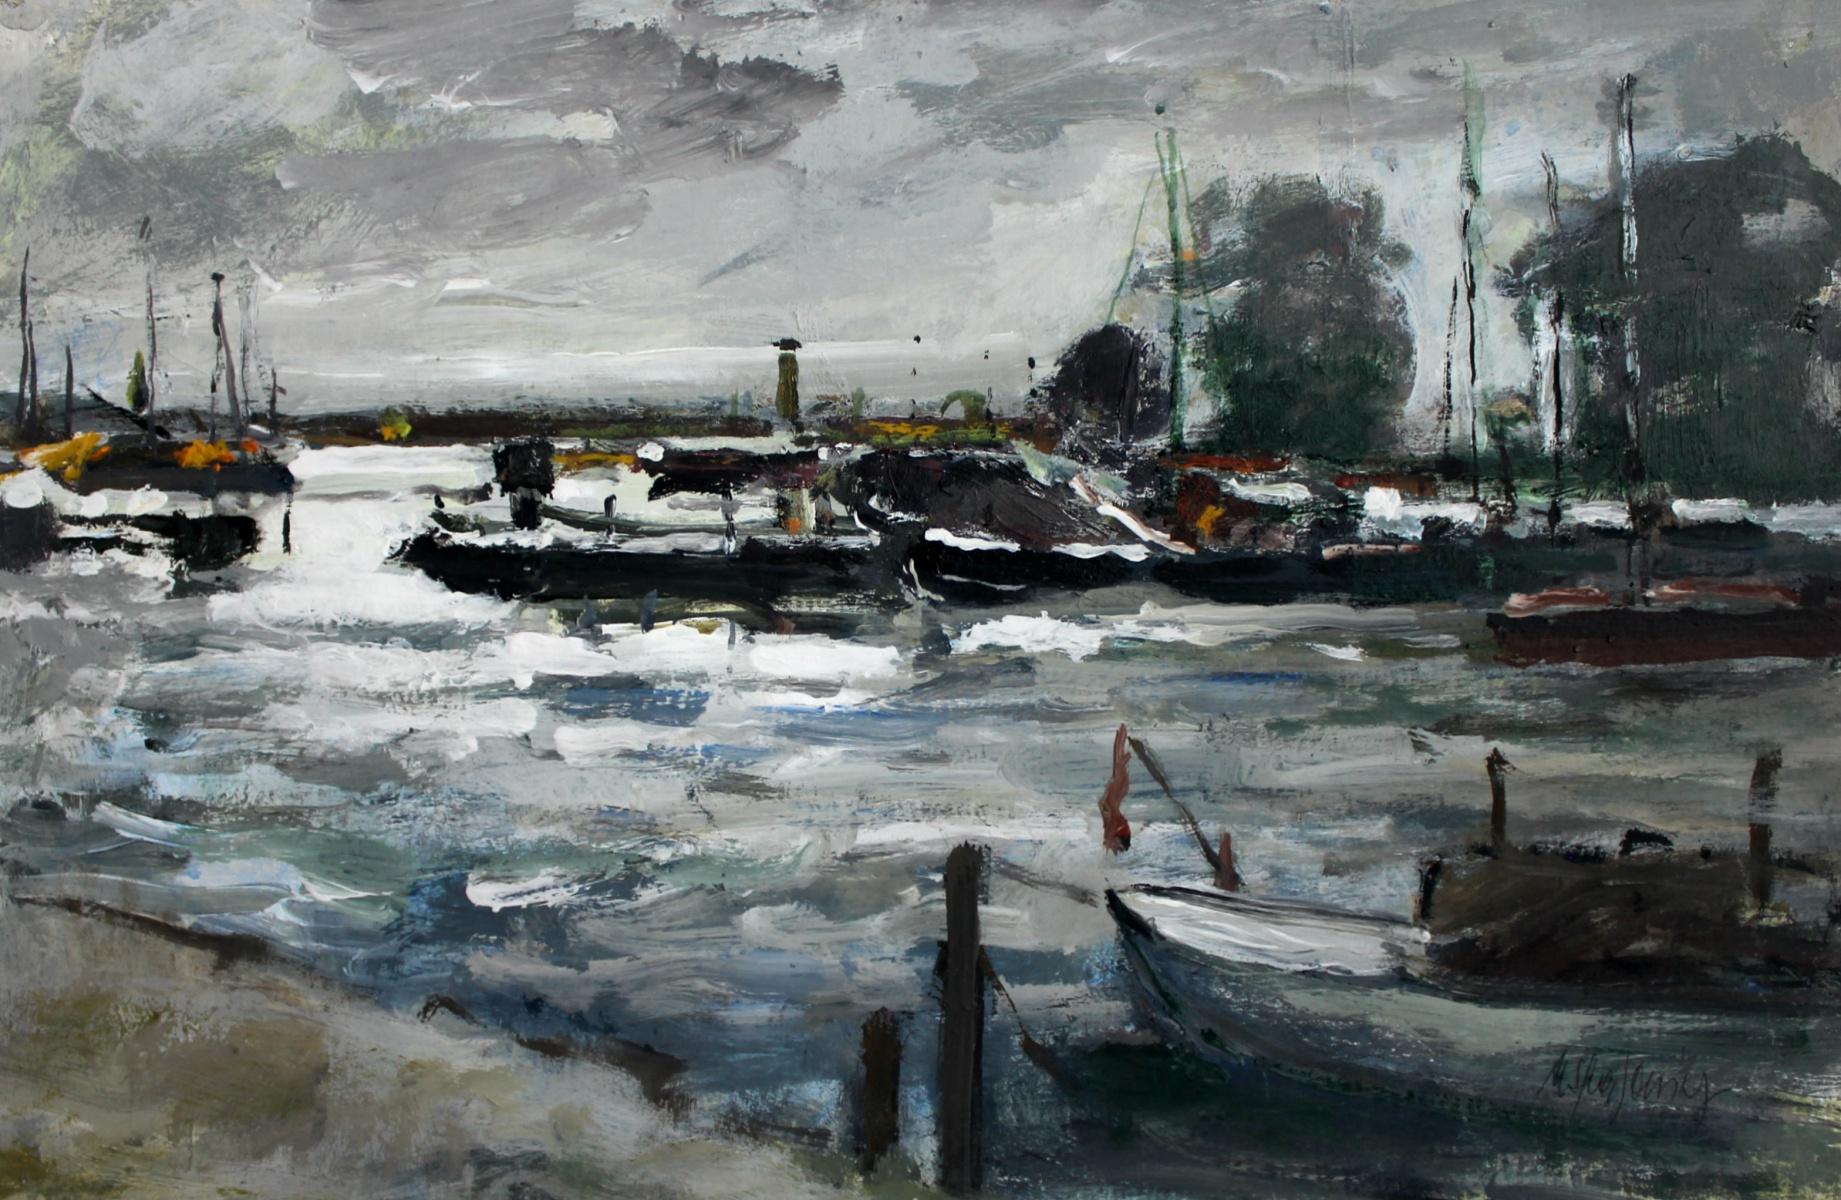 Magdalena Spasowicz Landscape Painting - Boats - Oil painting, Figurative, Landscape, Muted colors, Impressionism